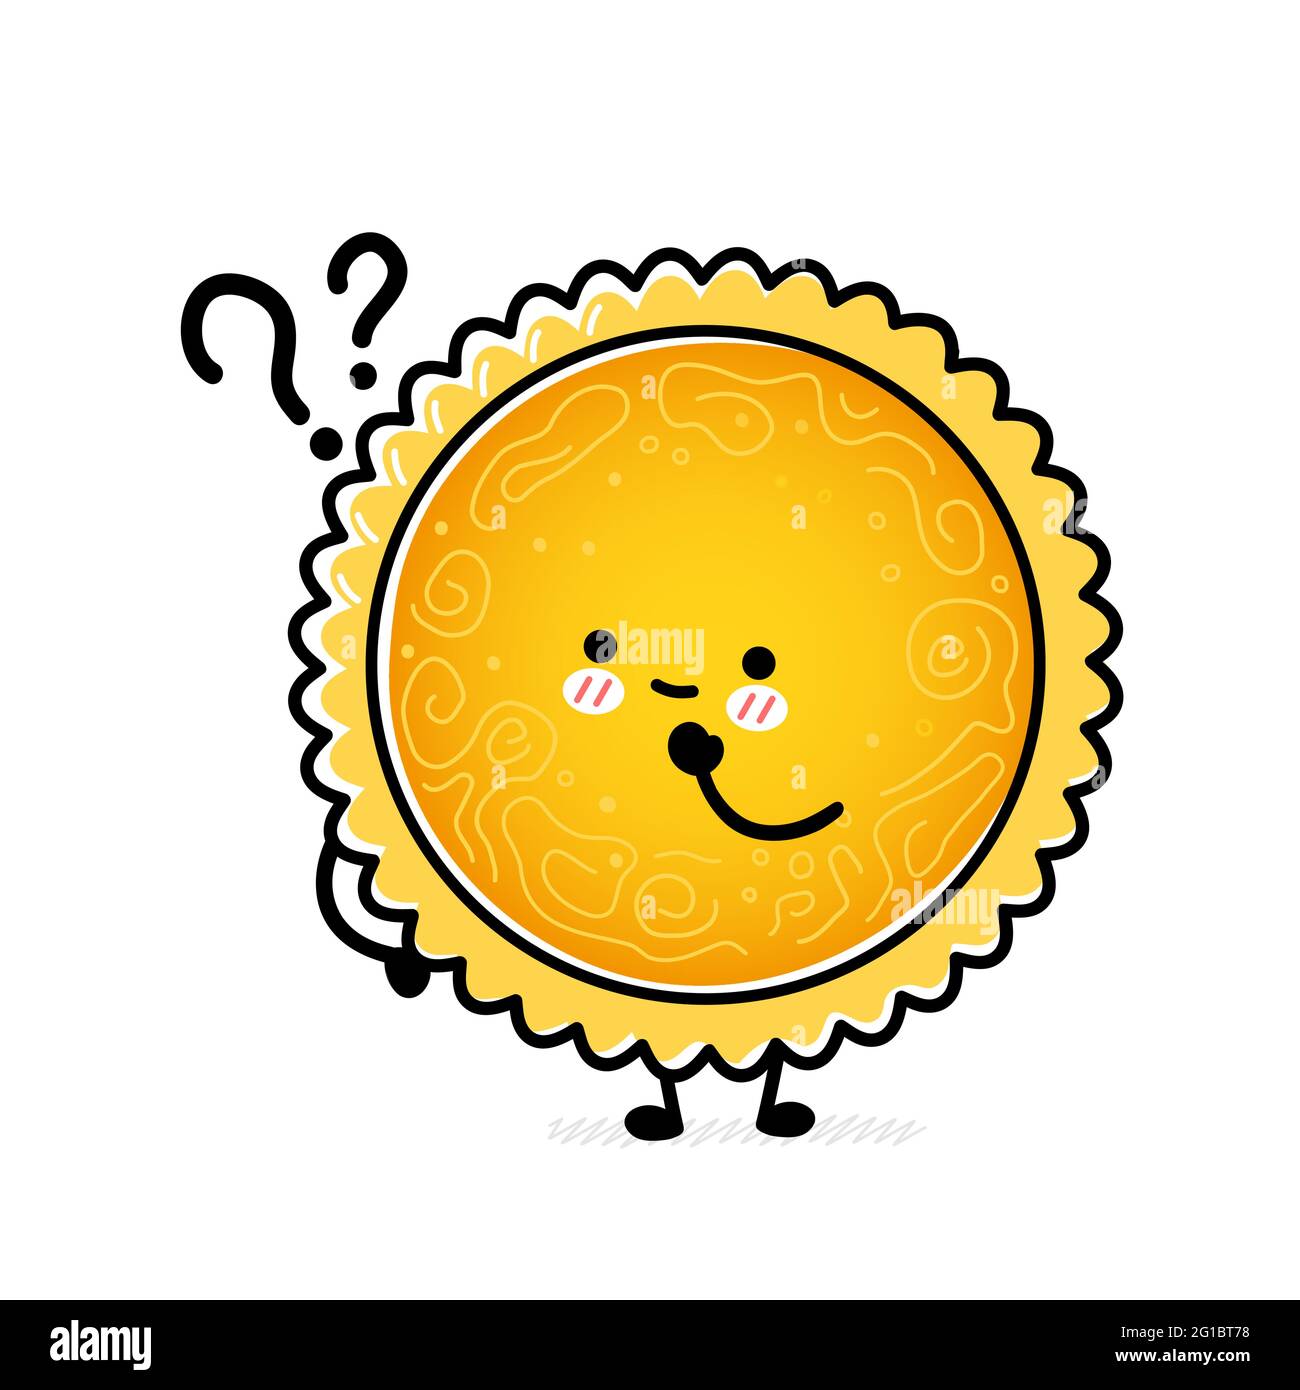 Cute funny Sun with question marks. Vector hand drawn cartoon kawaii character illustration icon. Isolated on white background. Sun mascot character concept Stock Vector